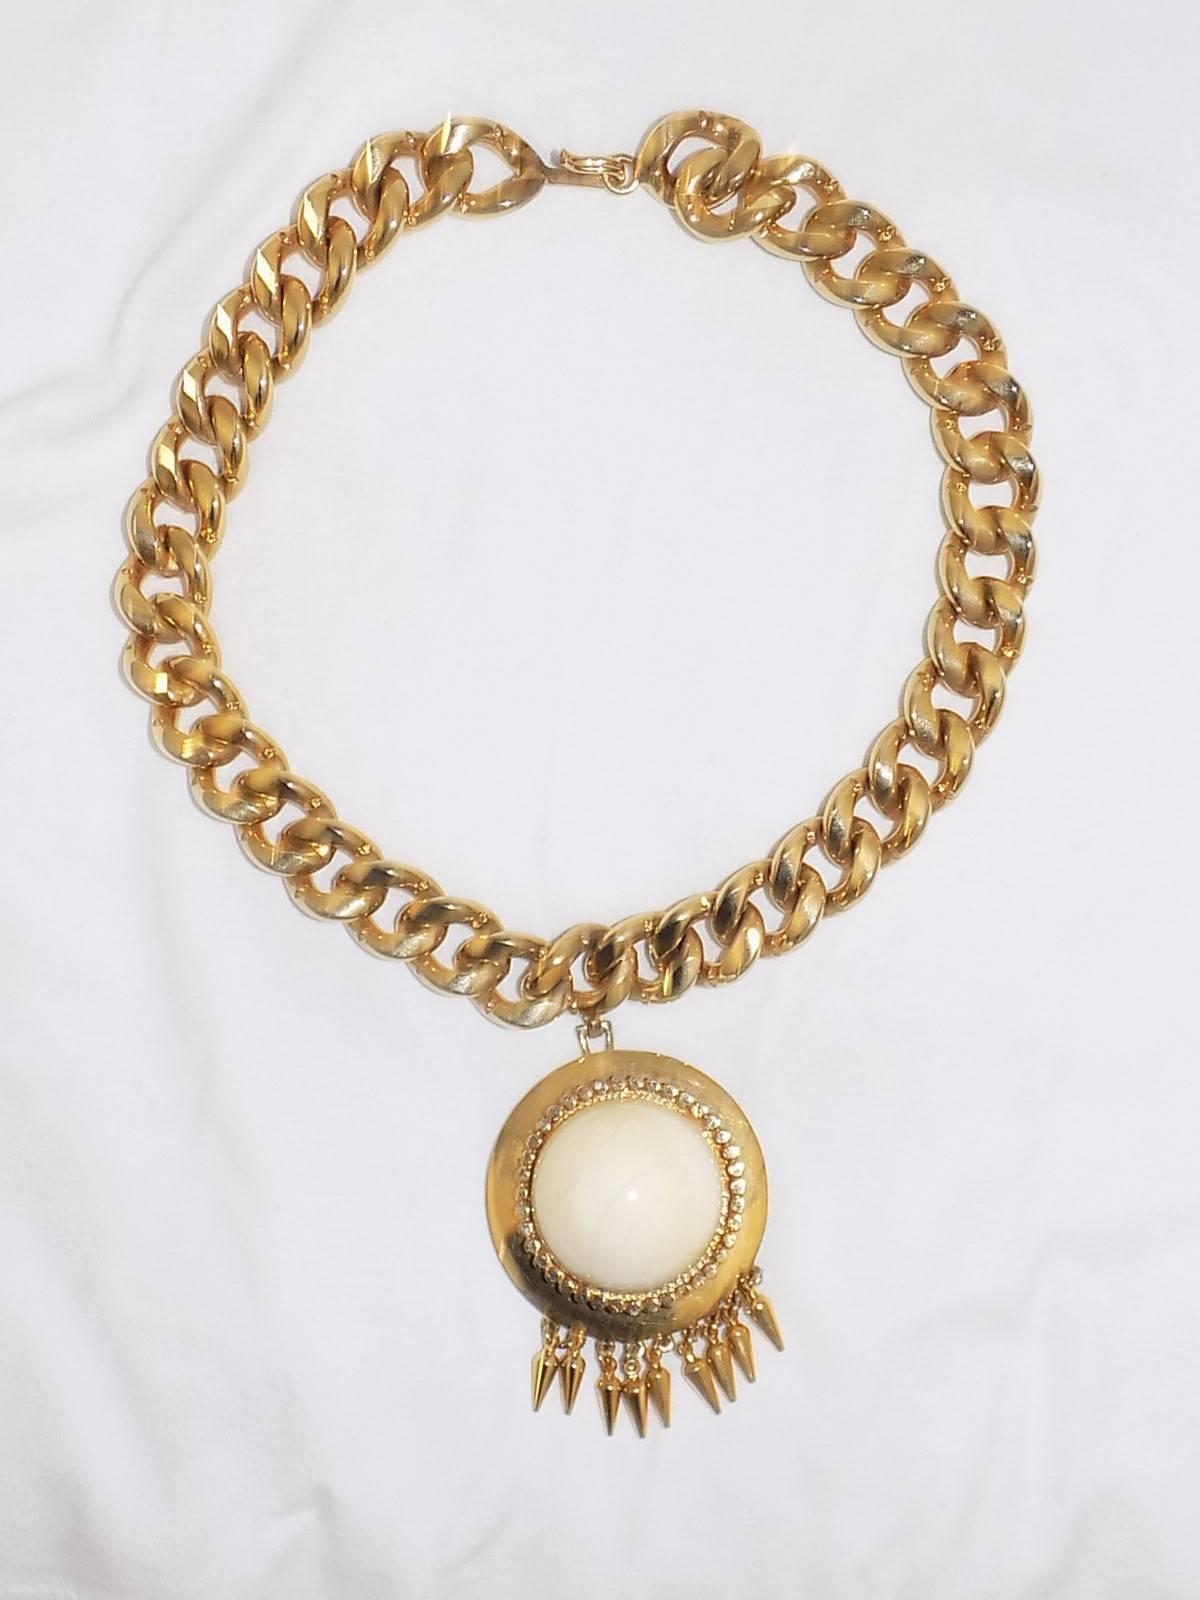 nettie rosentien large dome choker necklace  In Excellent Condition For Sale In New York, NY